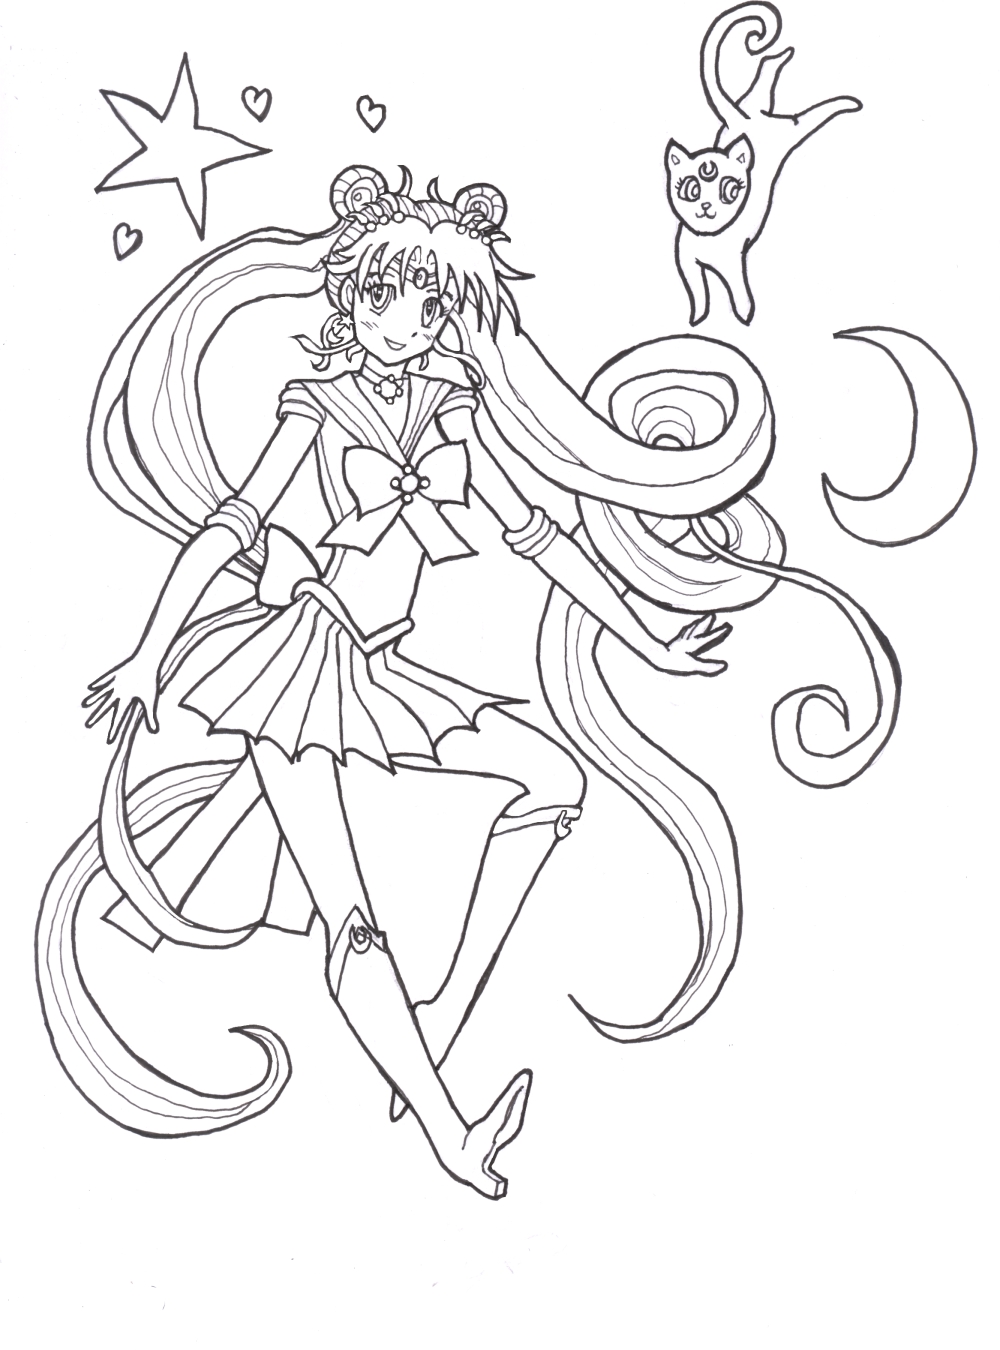 Sailor Moon Sketch at PaintingValley.com | Explore collection of Sailor ...